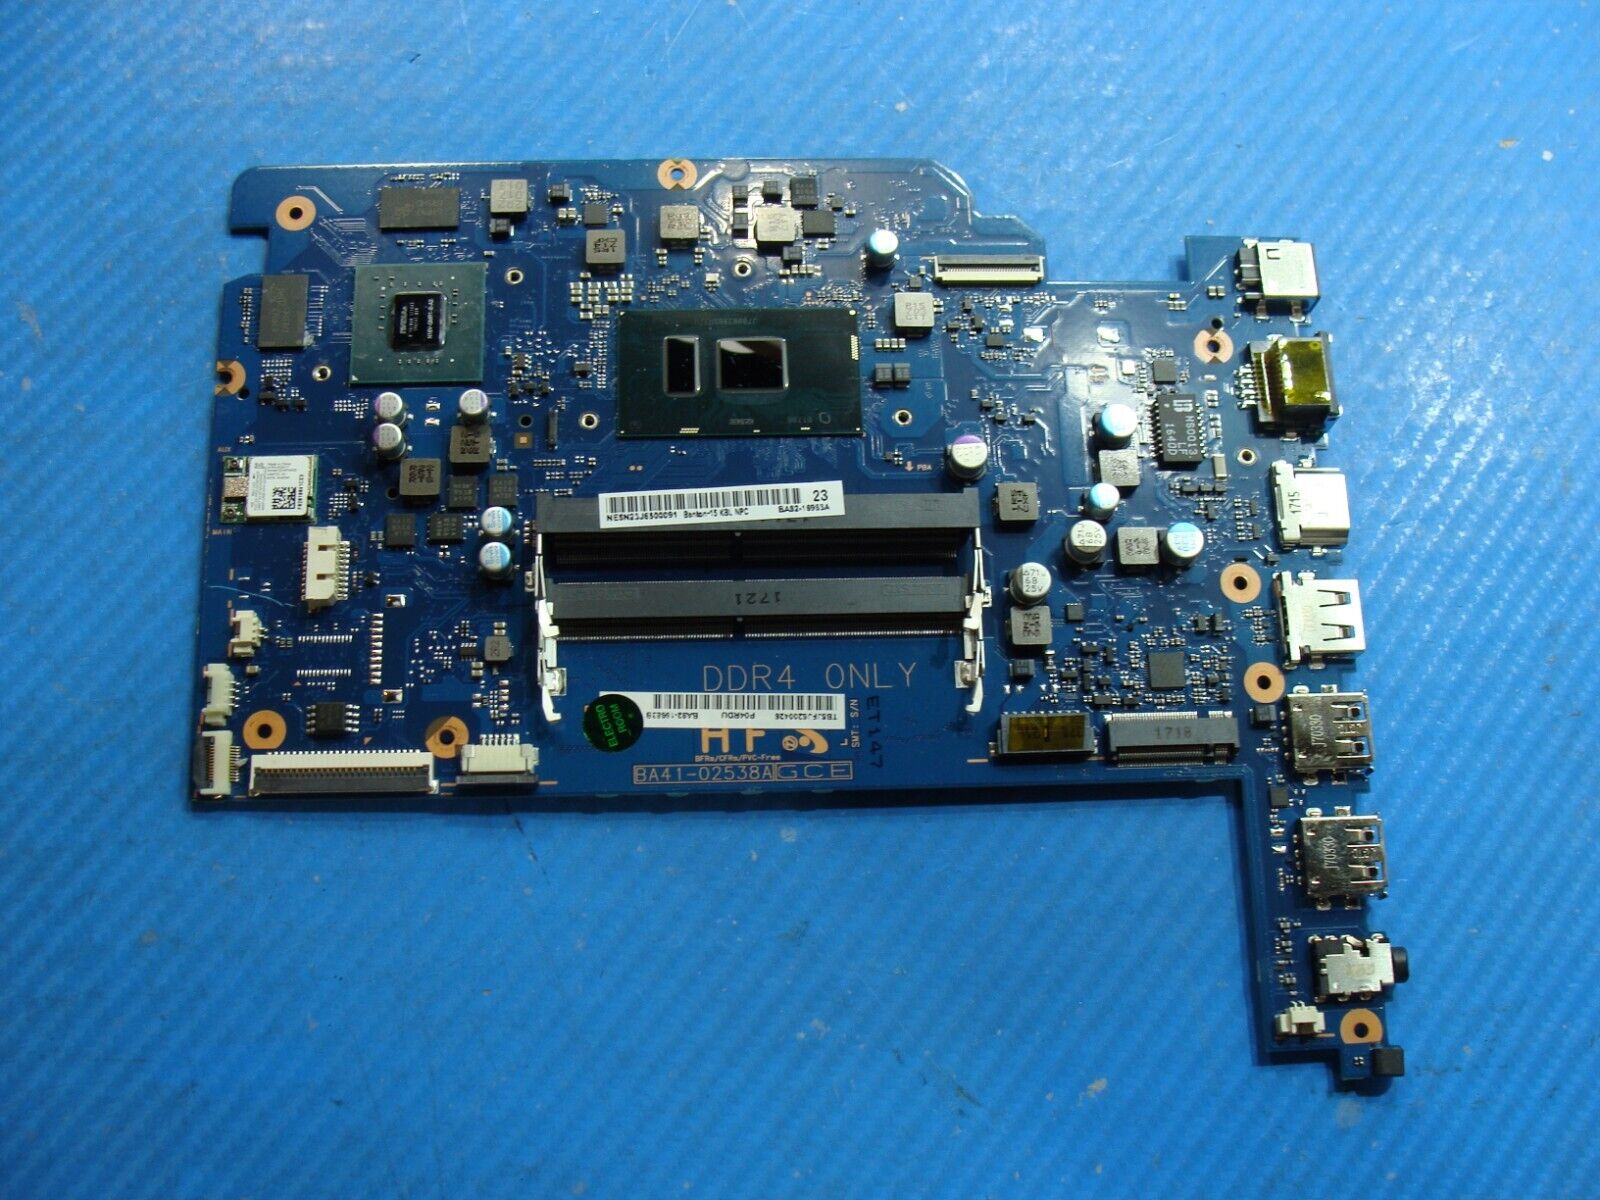 Samsung 15.6” NP530E5M-X02US i5-7200U 2.5GHz 920MX Motherboard BA92-16983A AS IS